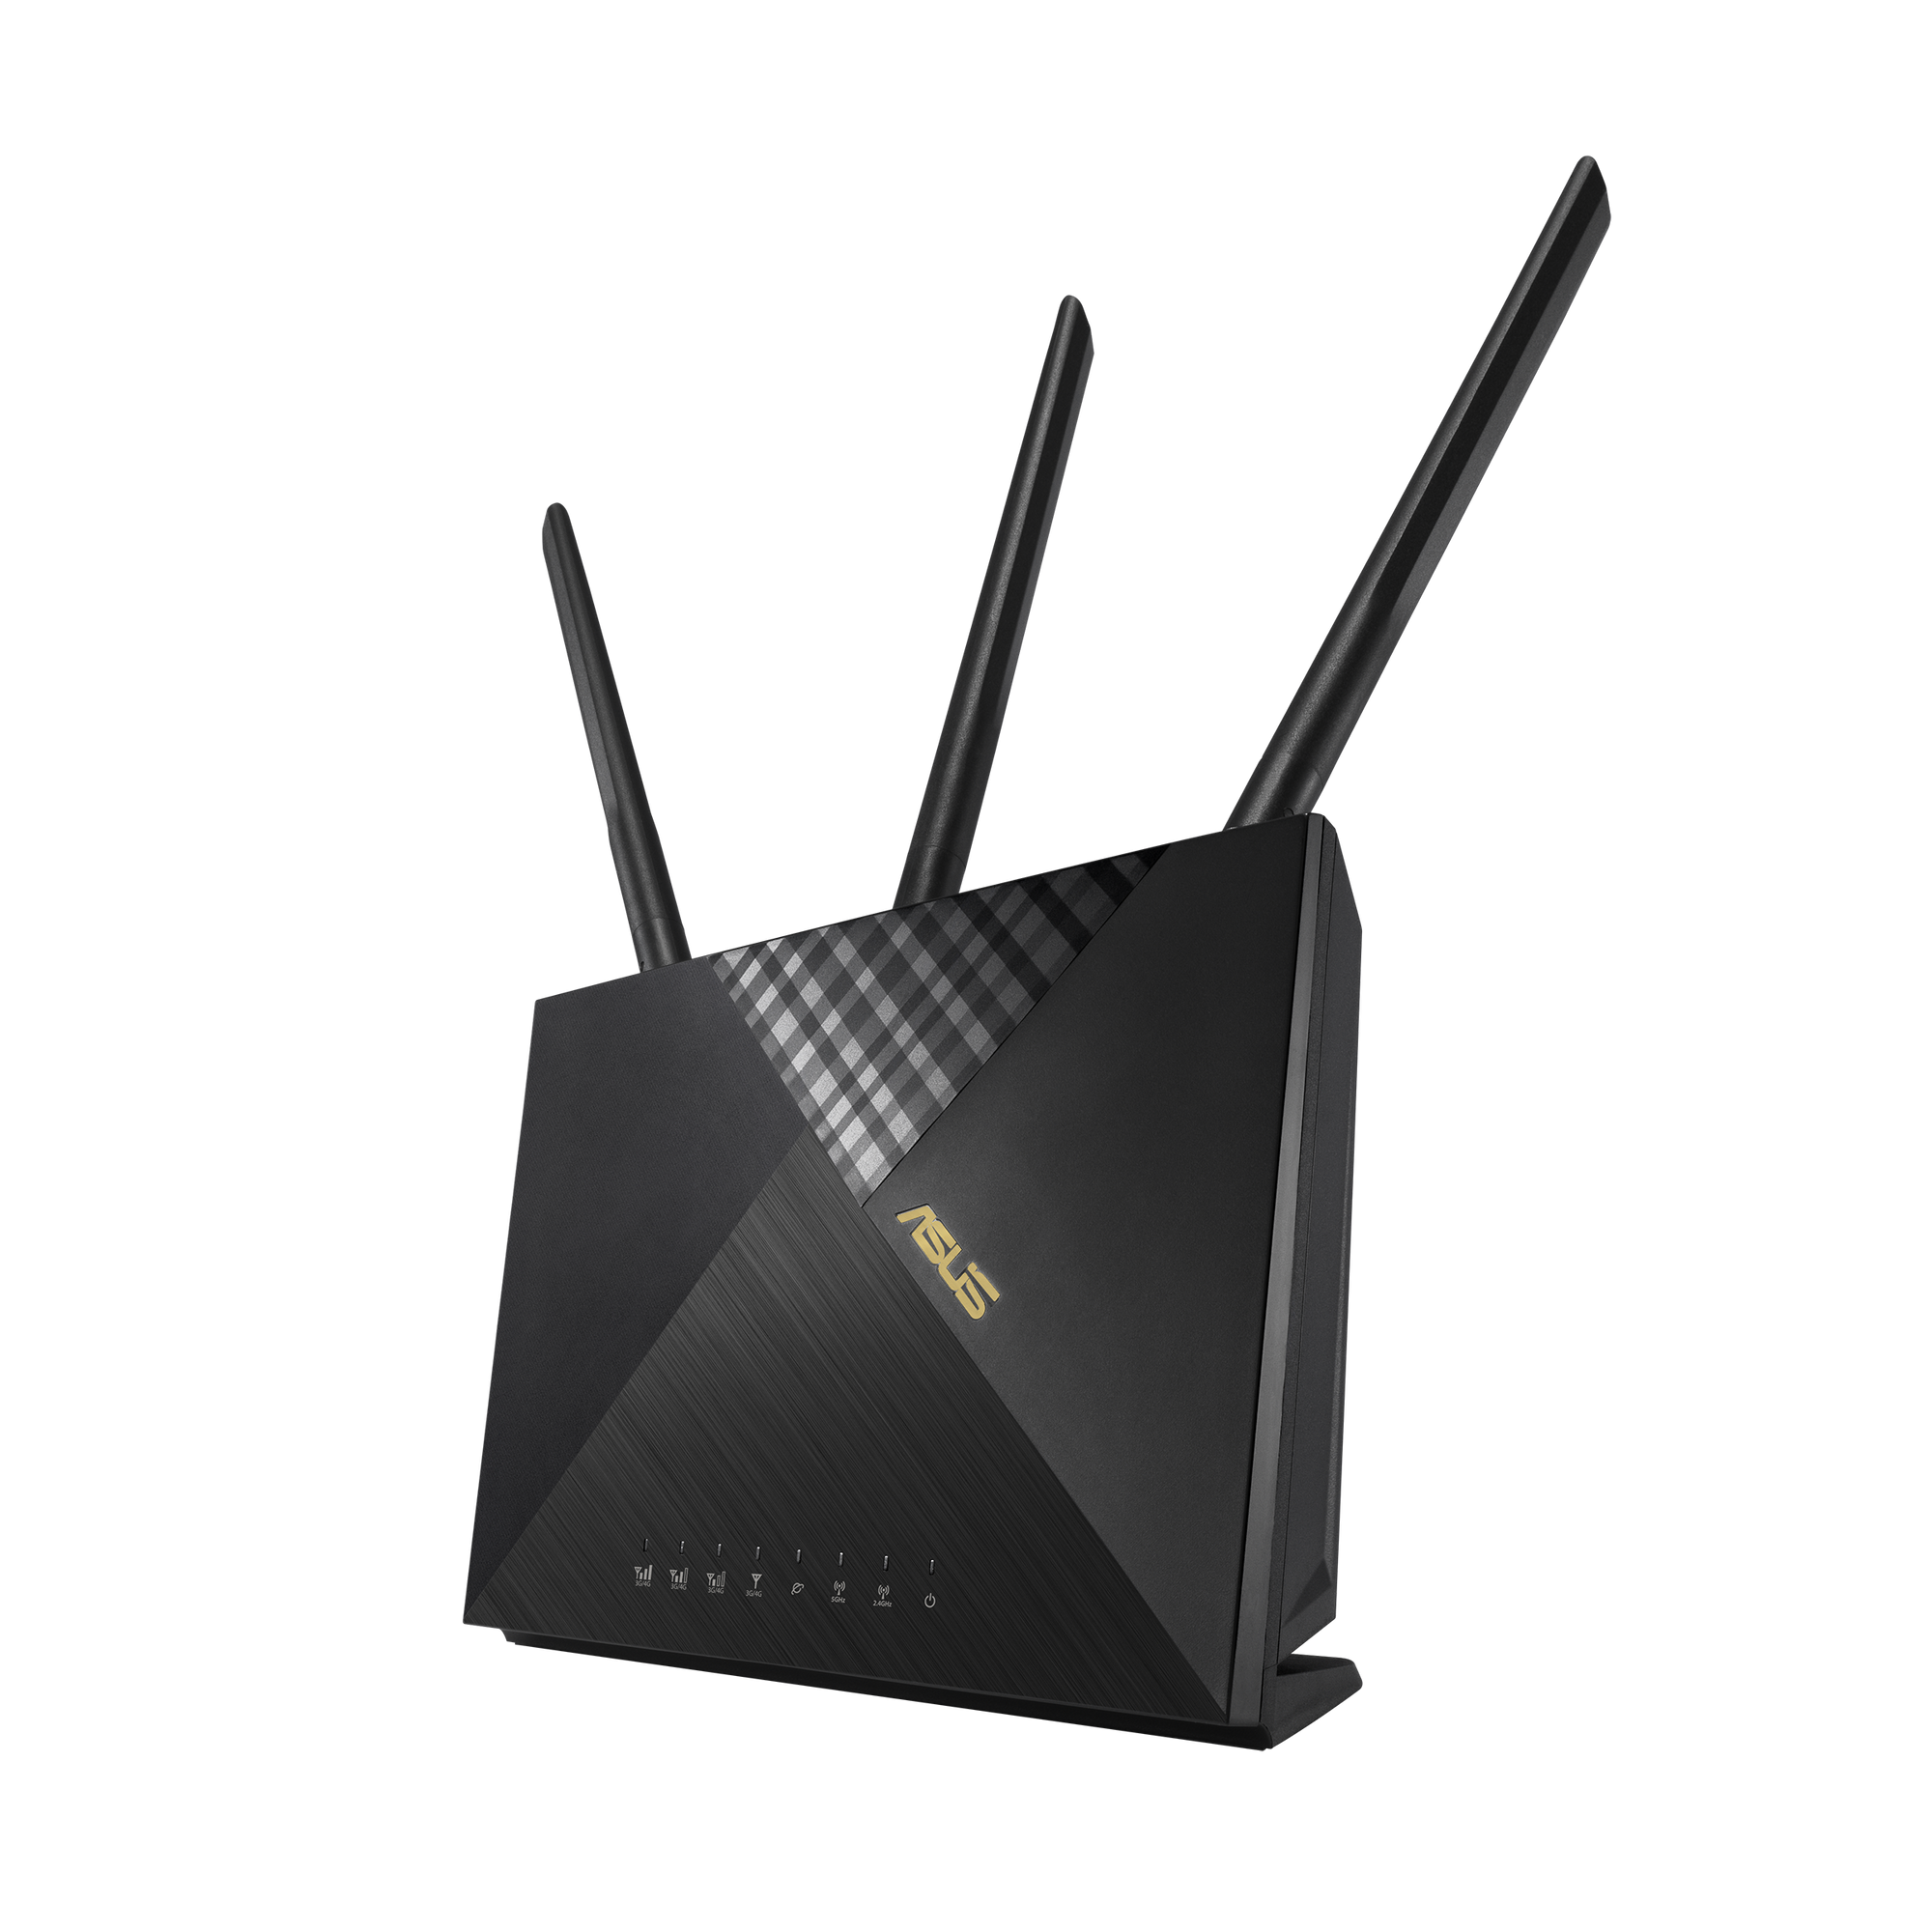 B-WARE ASUS 4G-AX56 AX1800 LTE Router   [refurbished] 2